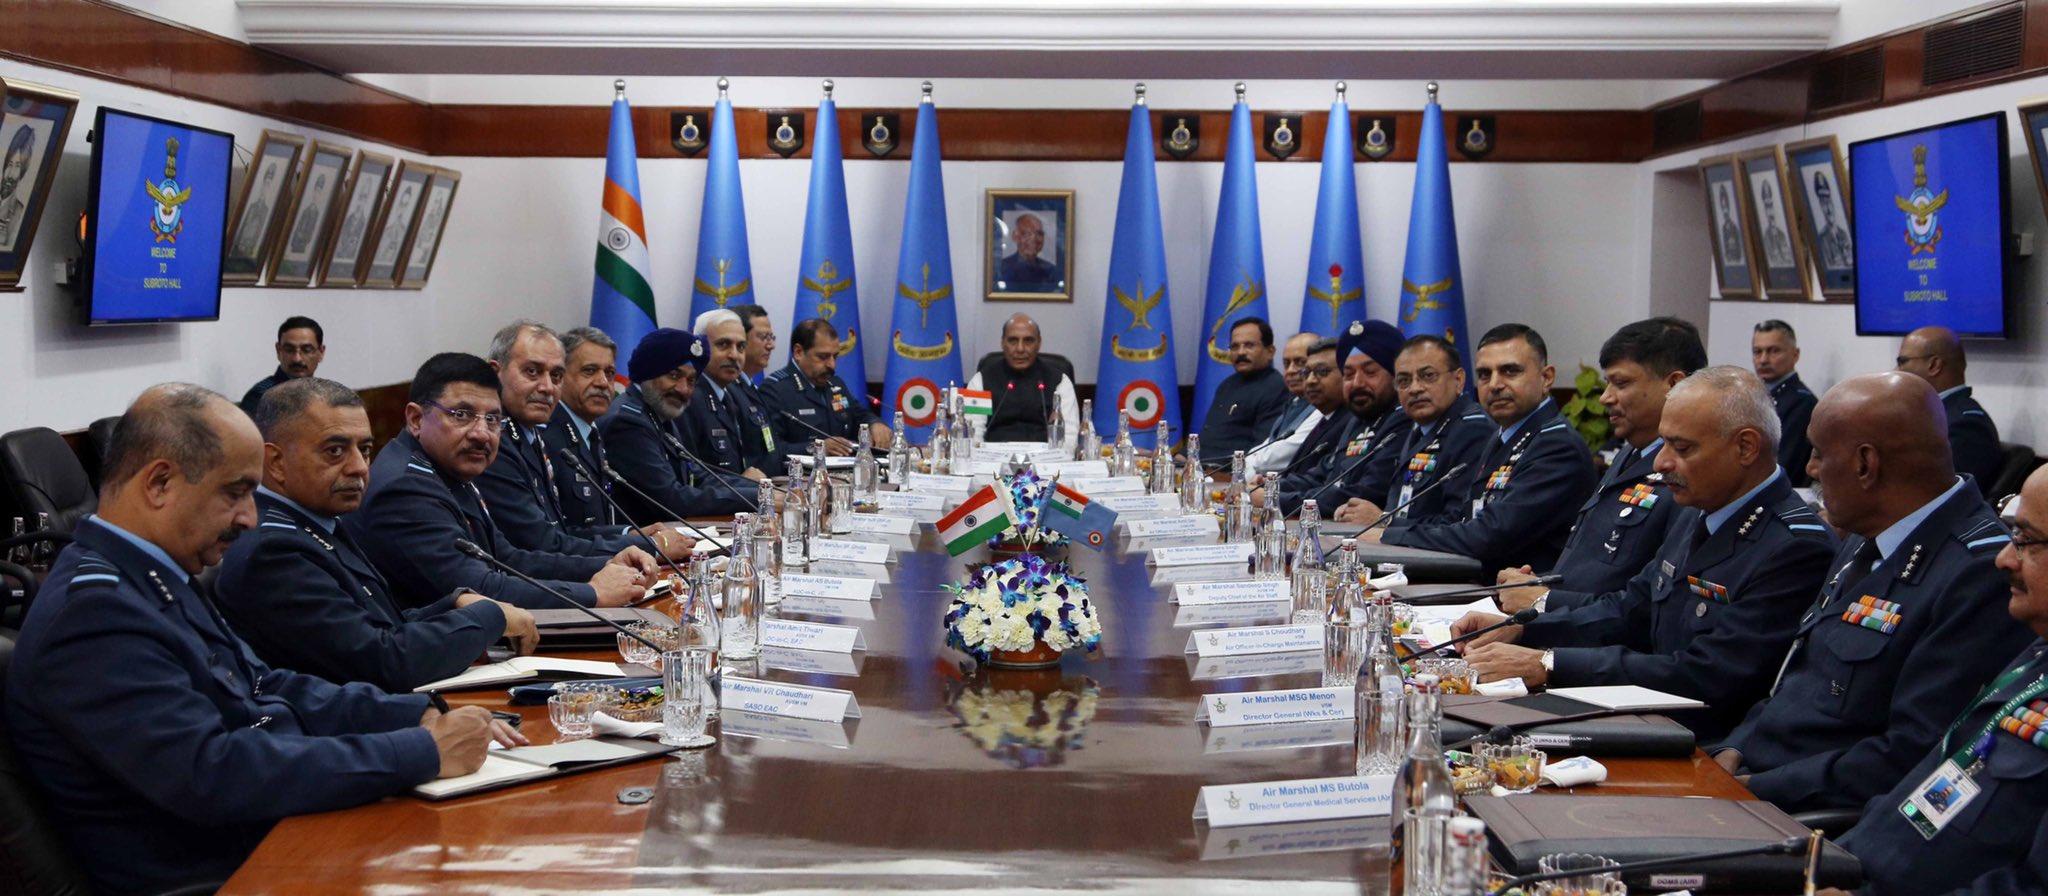 Air Force Commanders Conference to be held from July 22